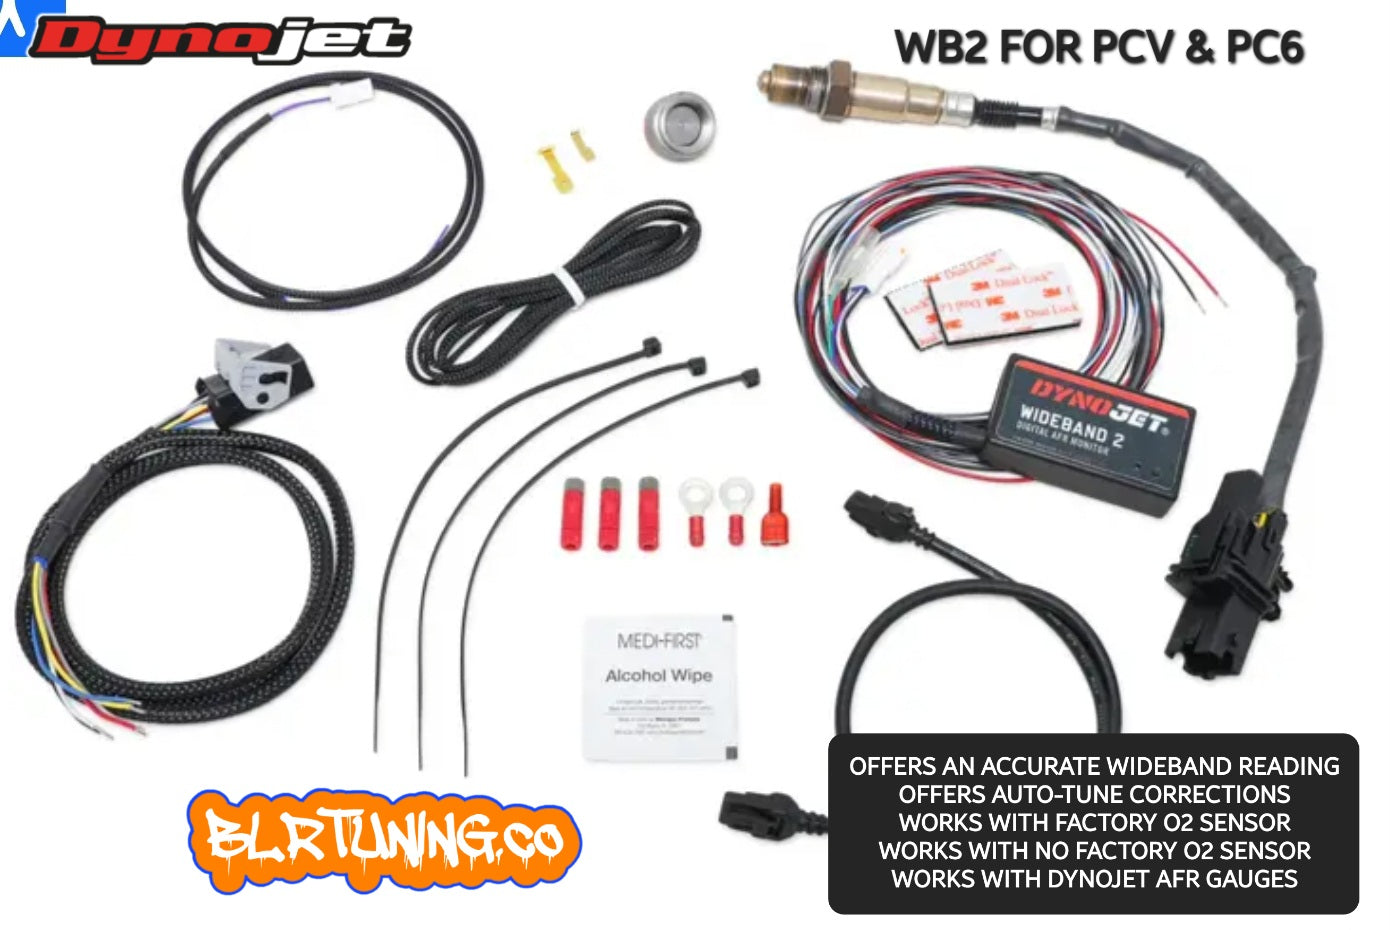 WB2 WIDE BAND 2 WITH AUTOTUNE BASE KIT FOR POWER COMMANDER PC6 PCV